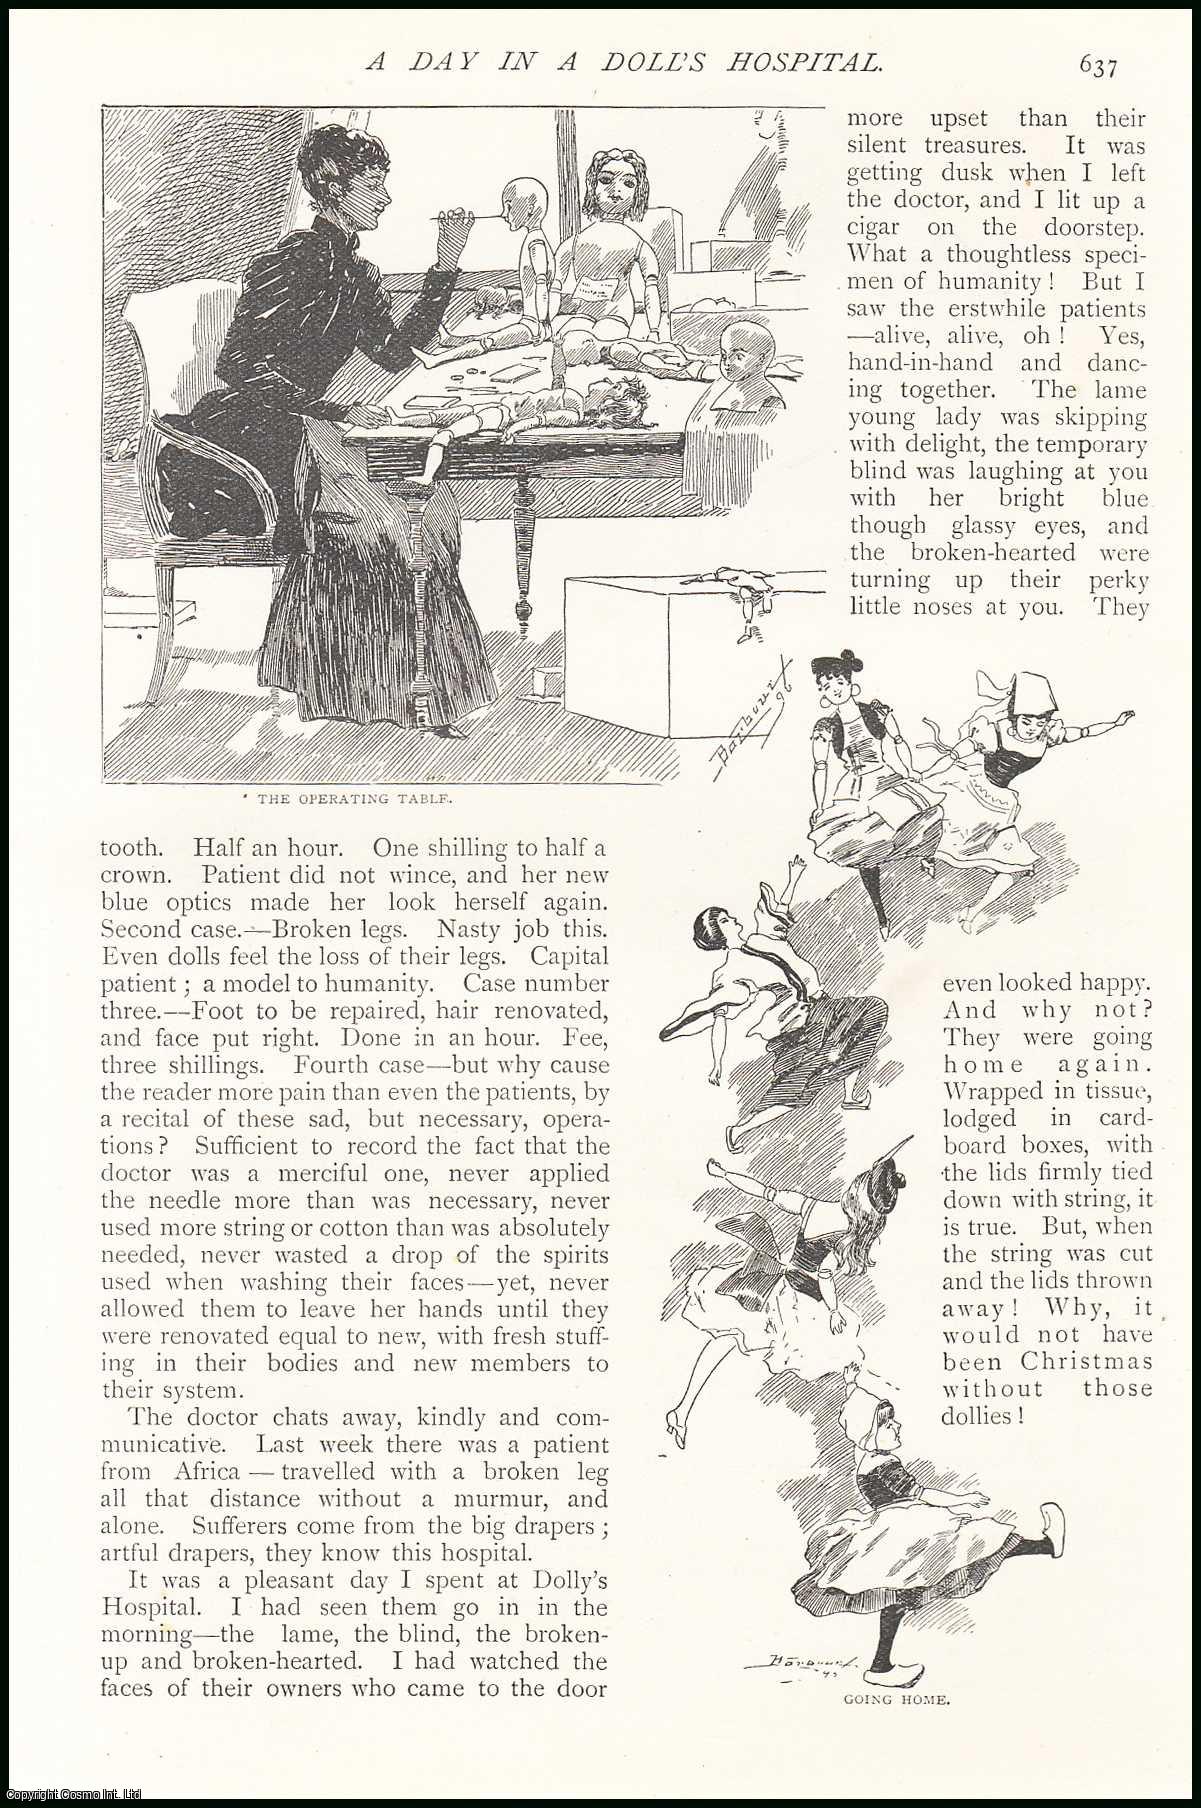 Harry How - A Day in A Doll's Hospital, Fulham Road : Dolly's Hospital, repairing dolls. An uncommon original article from The Strand Magazine, 1895.